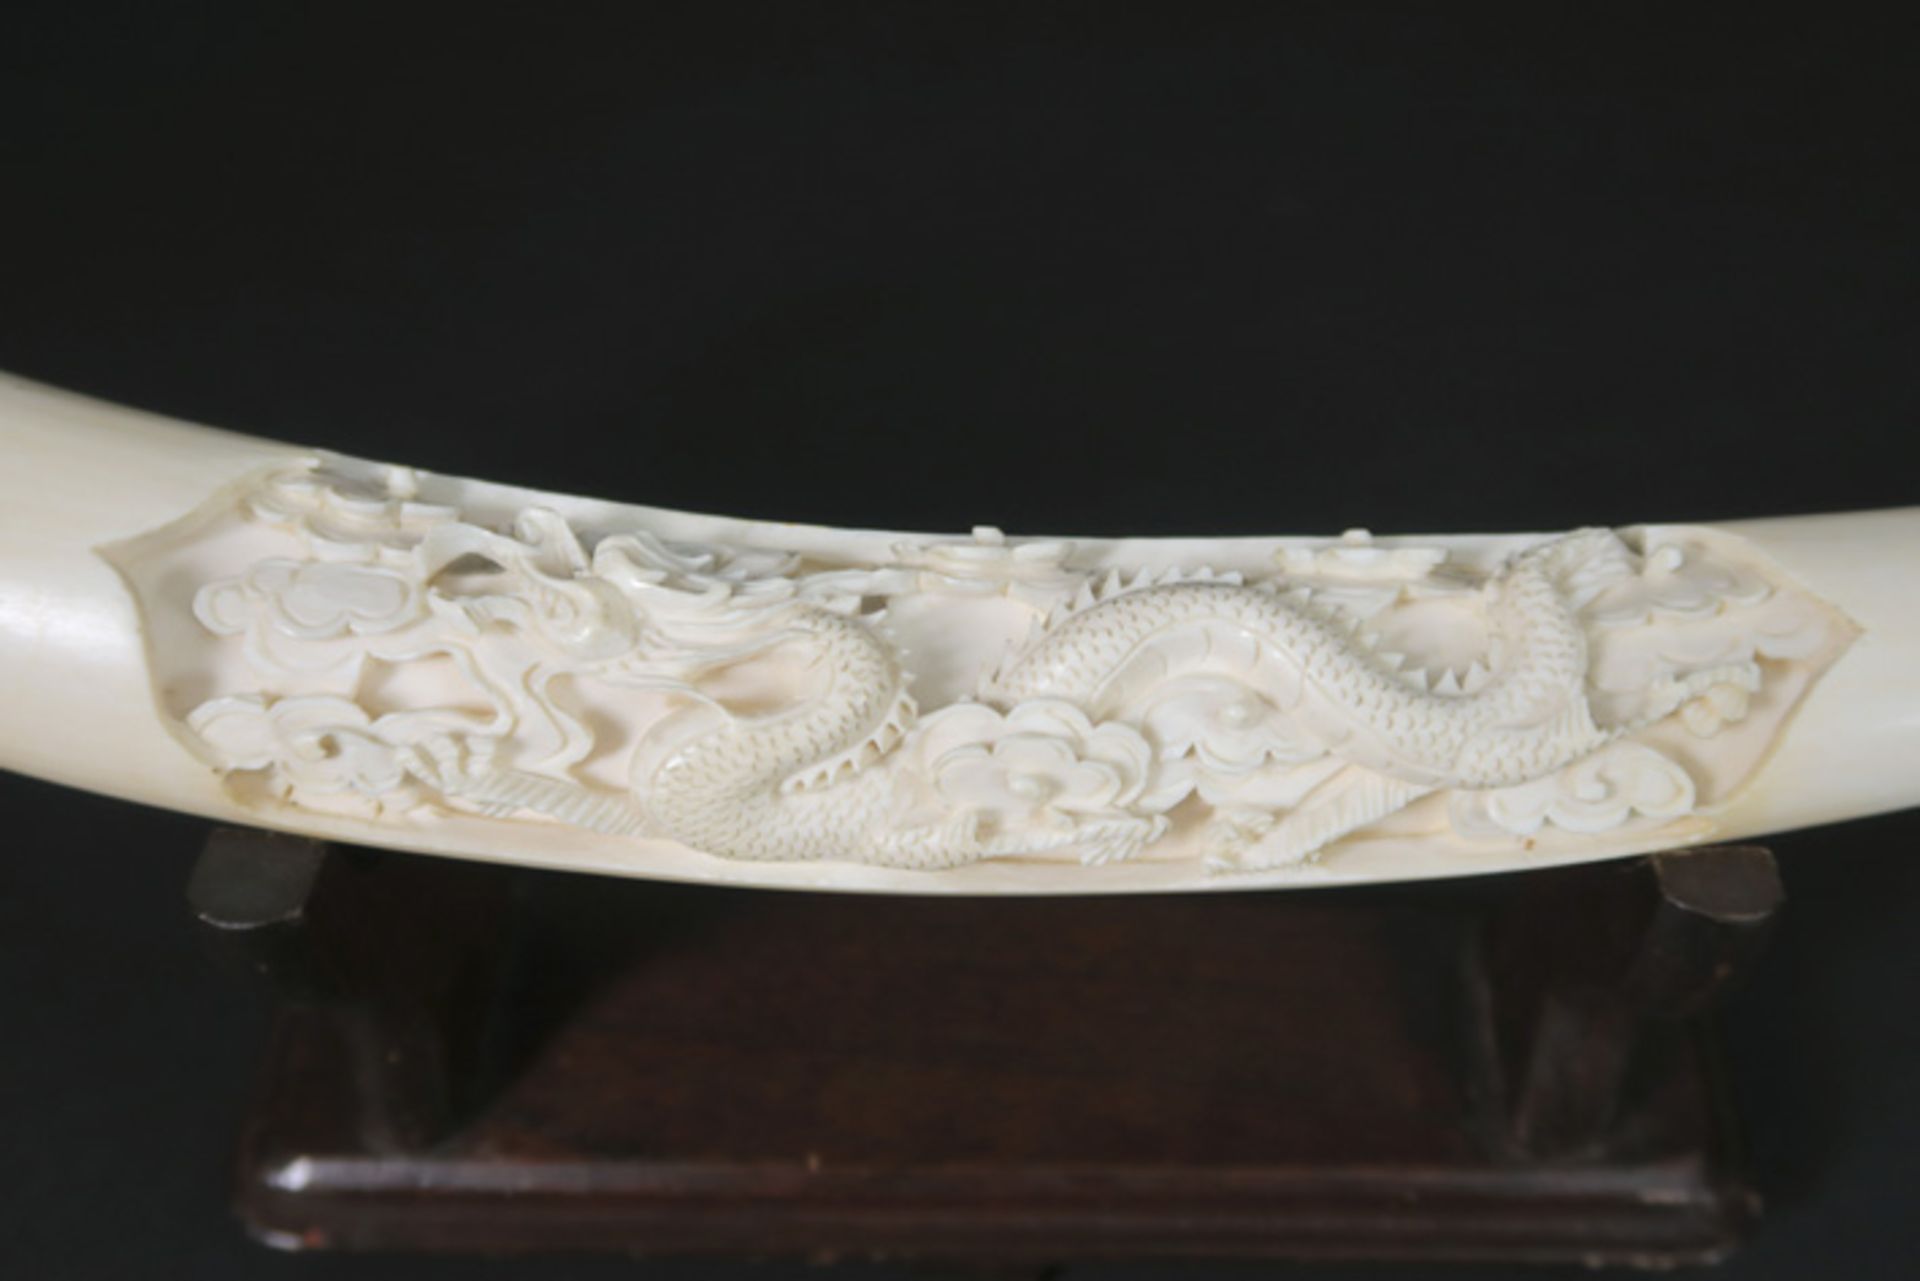 Chinese ivory tusk with a sculpted dragon decor Chinese ivoren "tand" met gesculpteerd drakendecor - - Image 2 of 2